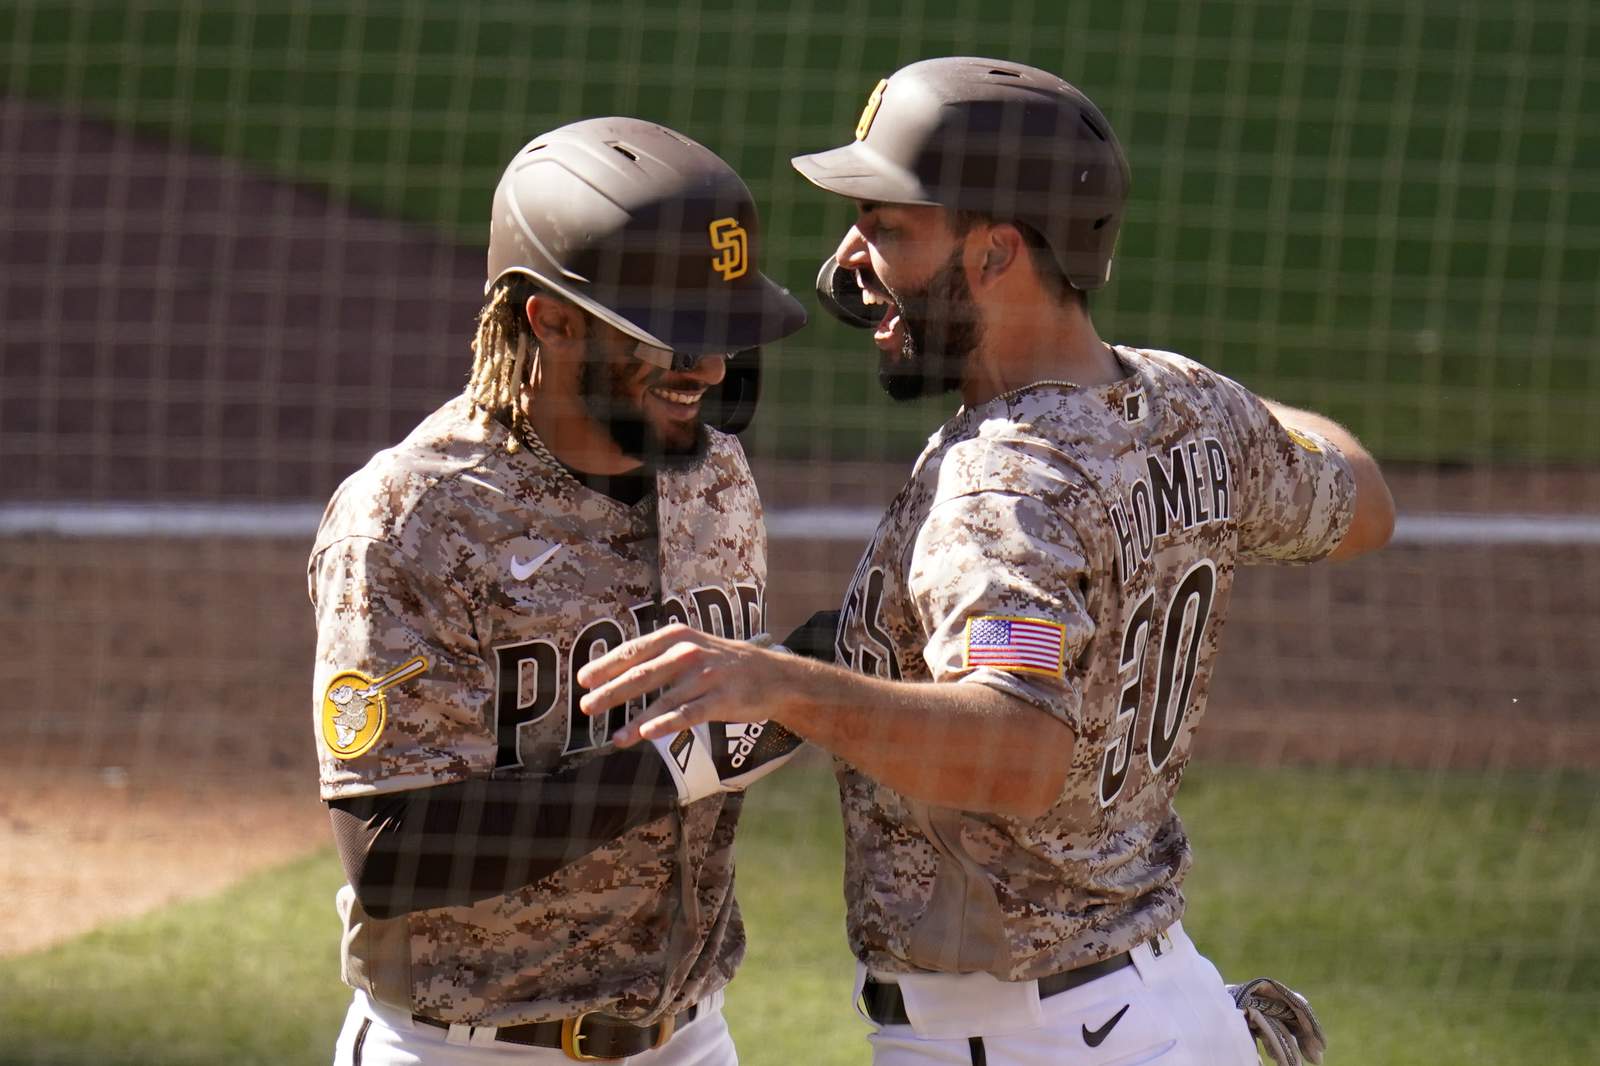 Cronenworth, Padres rally to stun Dodgers 5-3 to reach NLCS - Seattle Sports